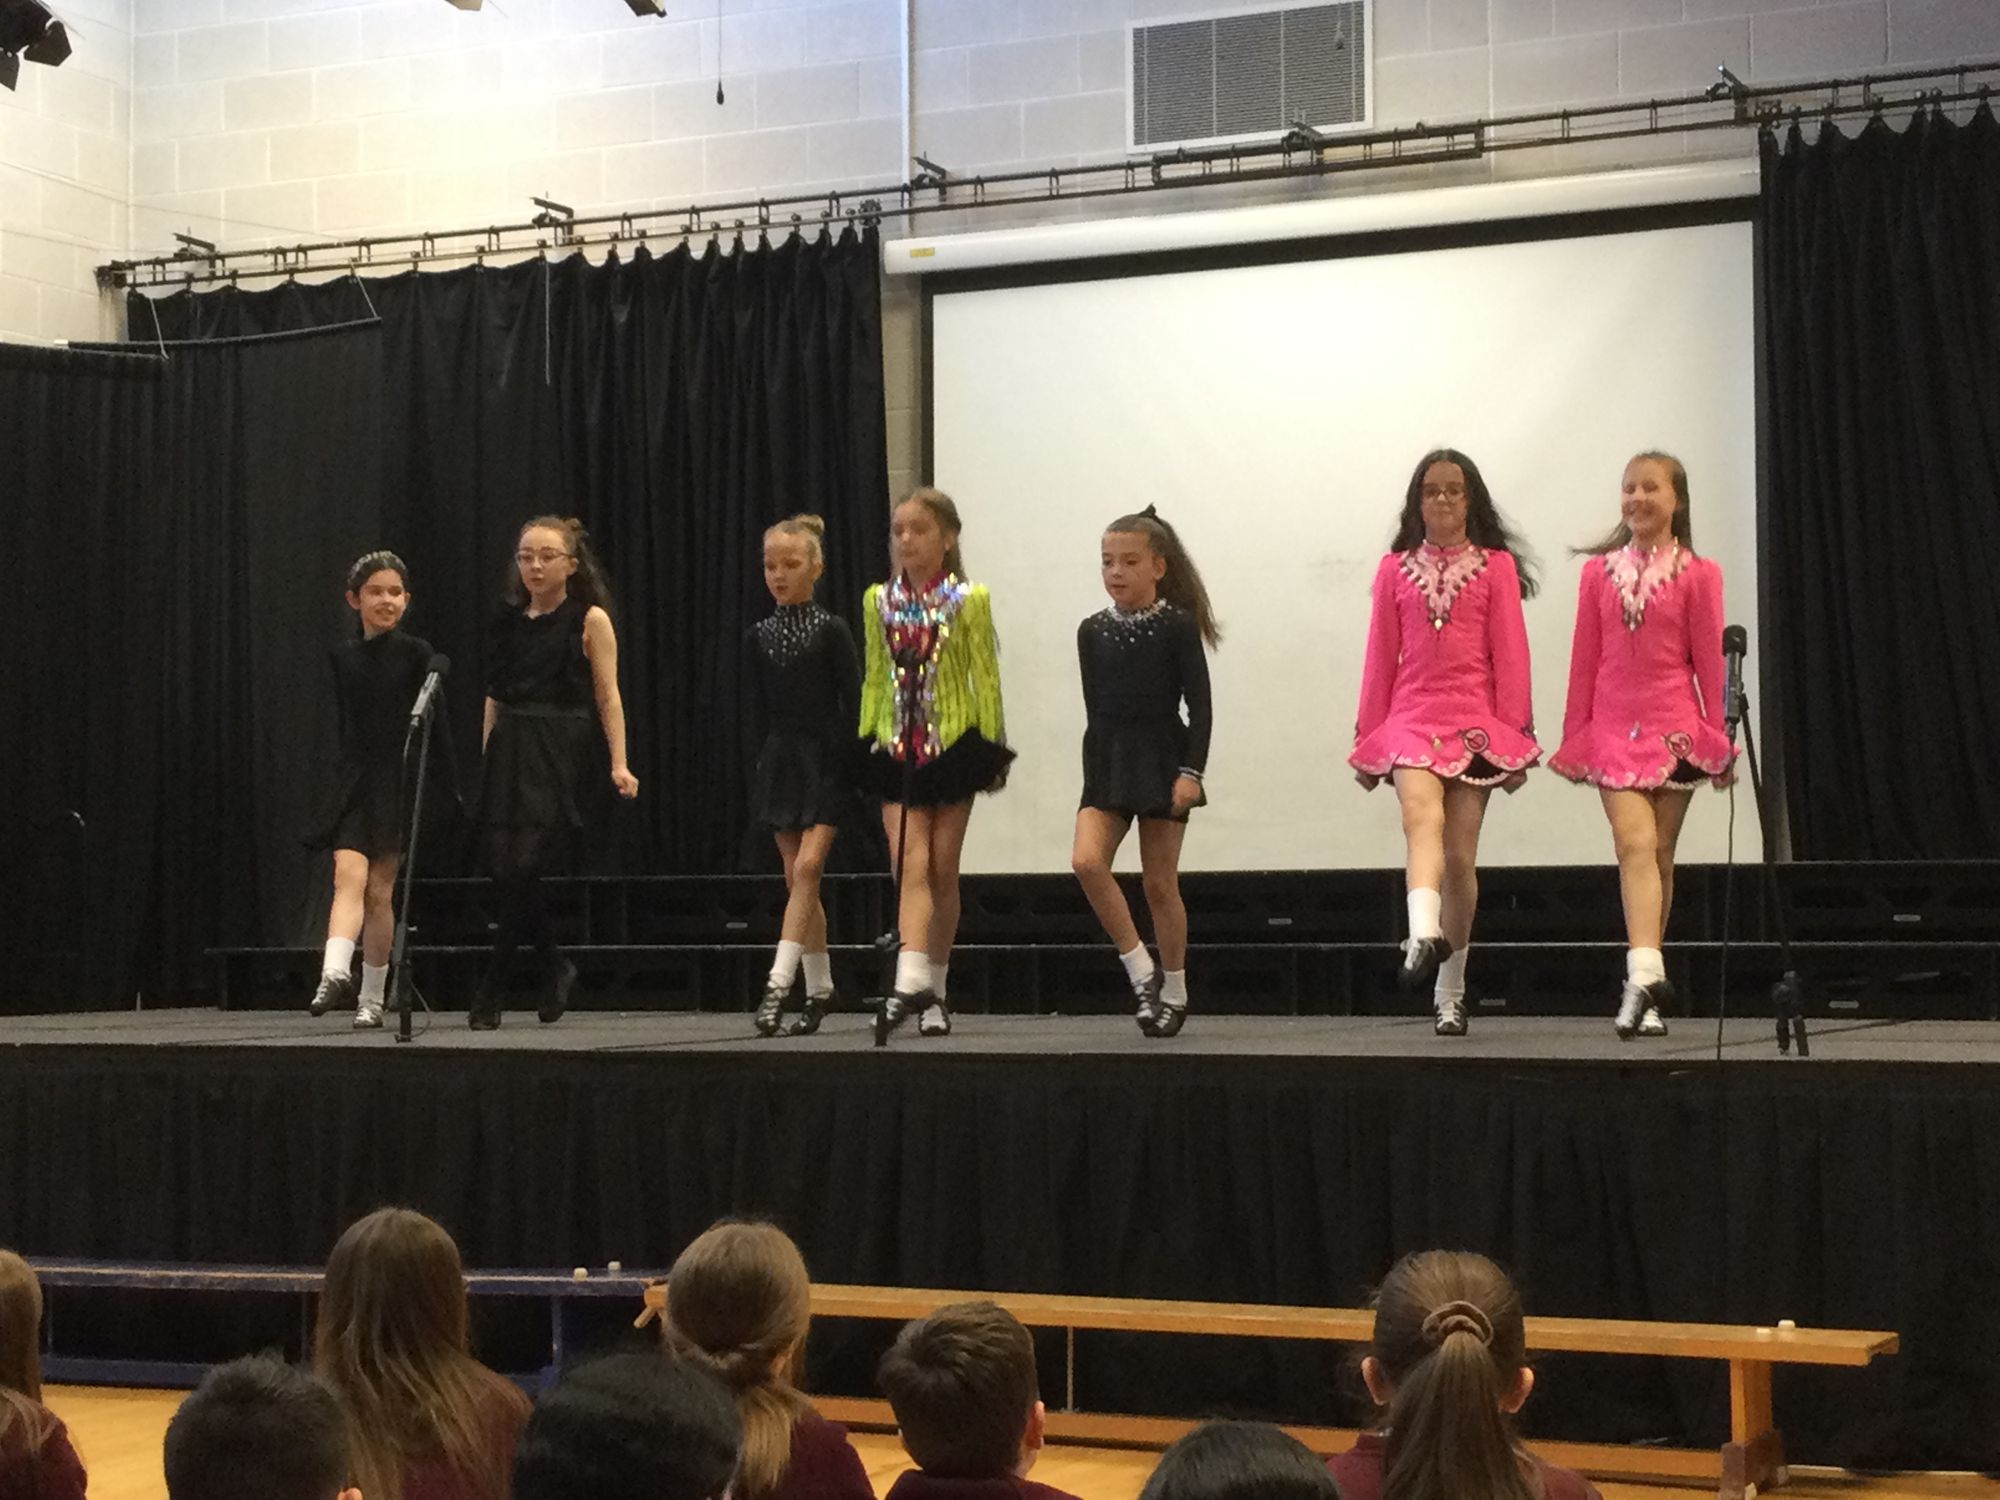 Best of luck to our Irish Dancers.